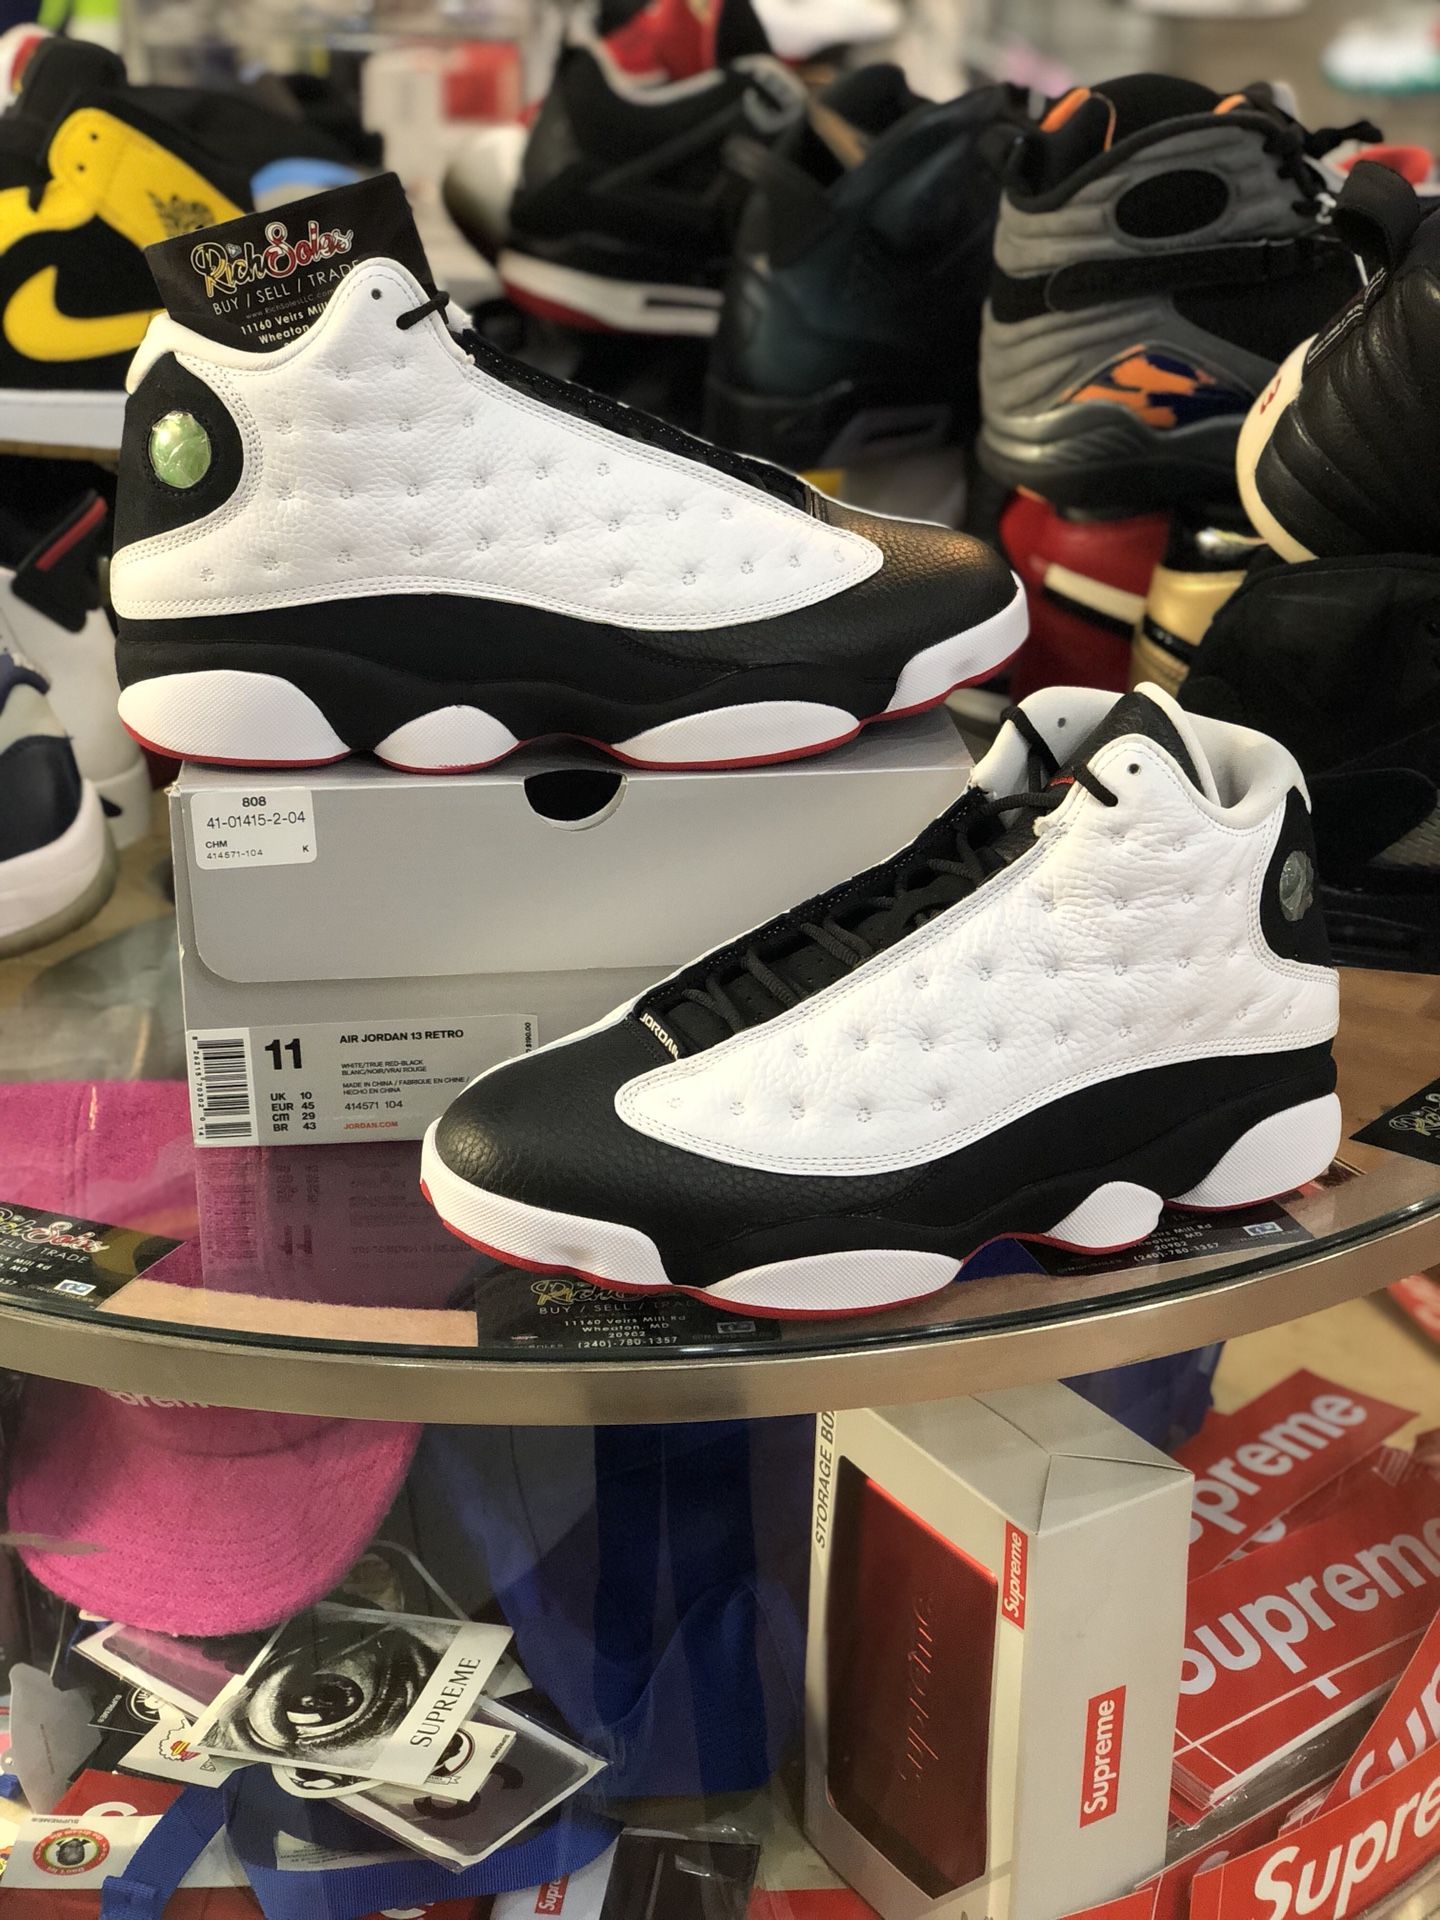 He Got Game 13’s size 11